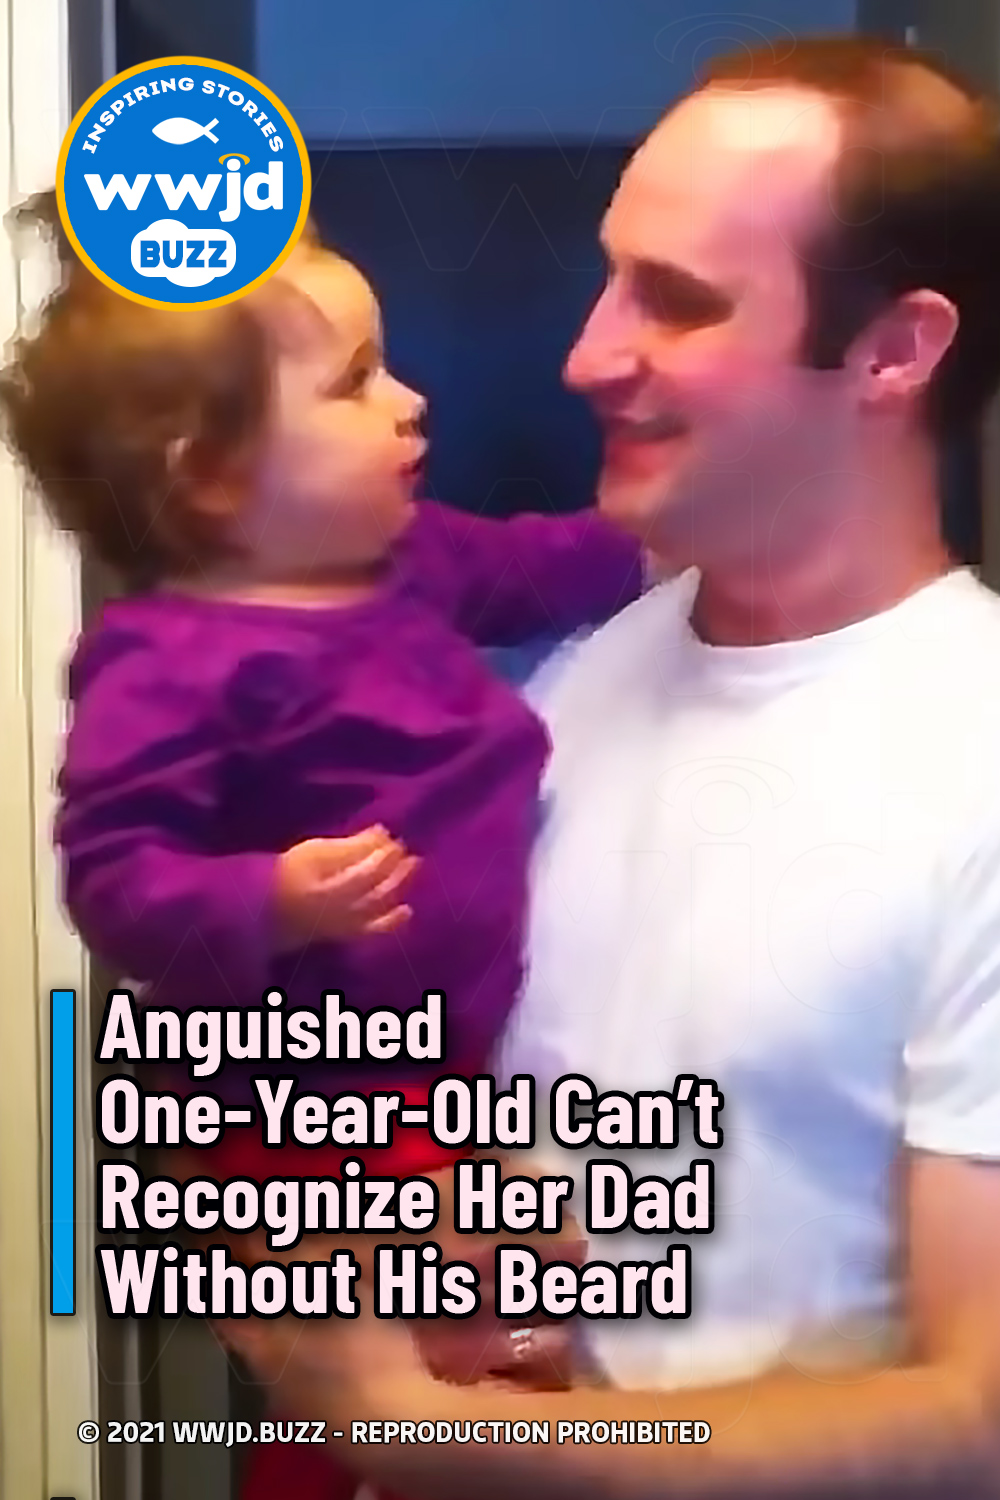 Anguished One-Year-Old Can’t Recognize Her Dad Without His Beard